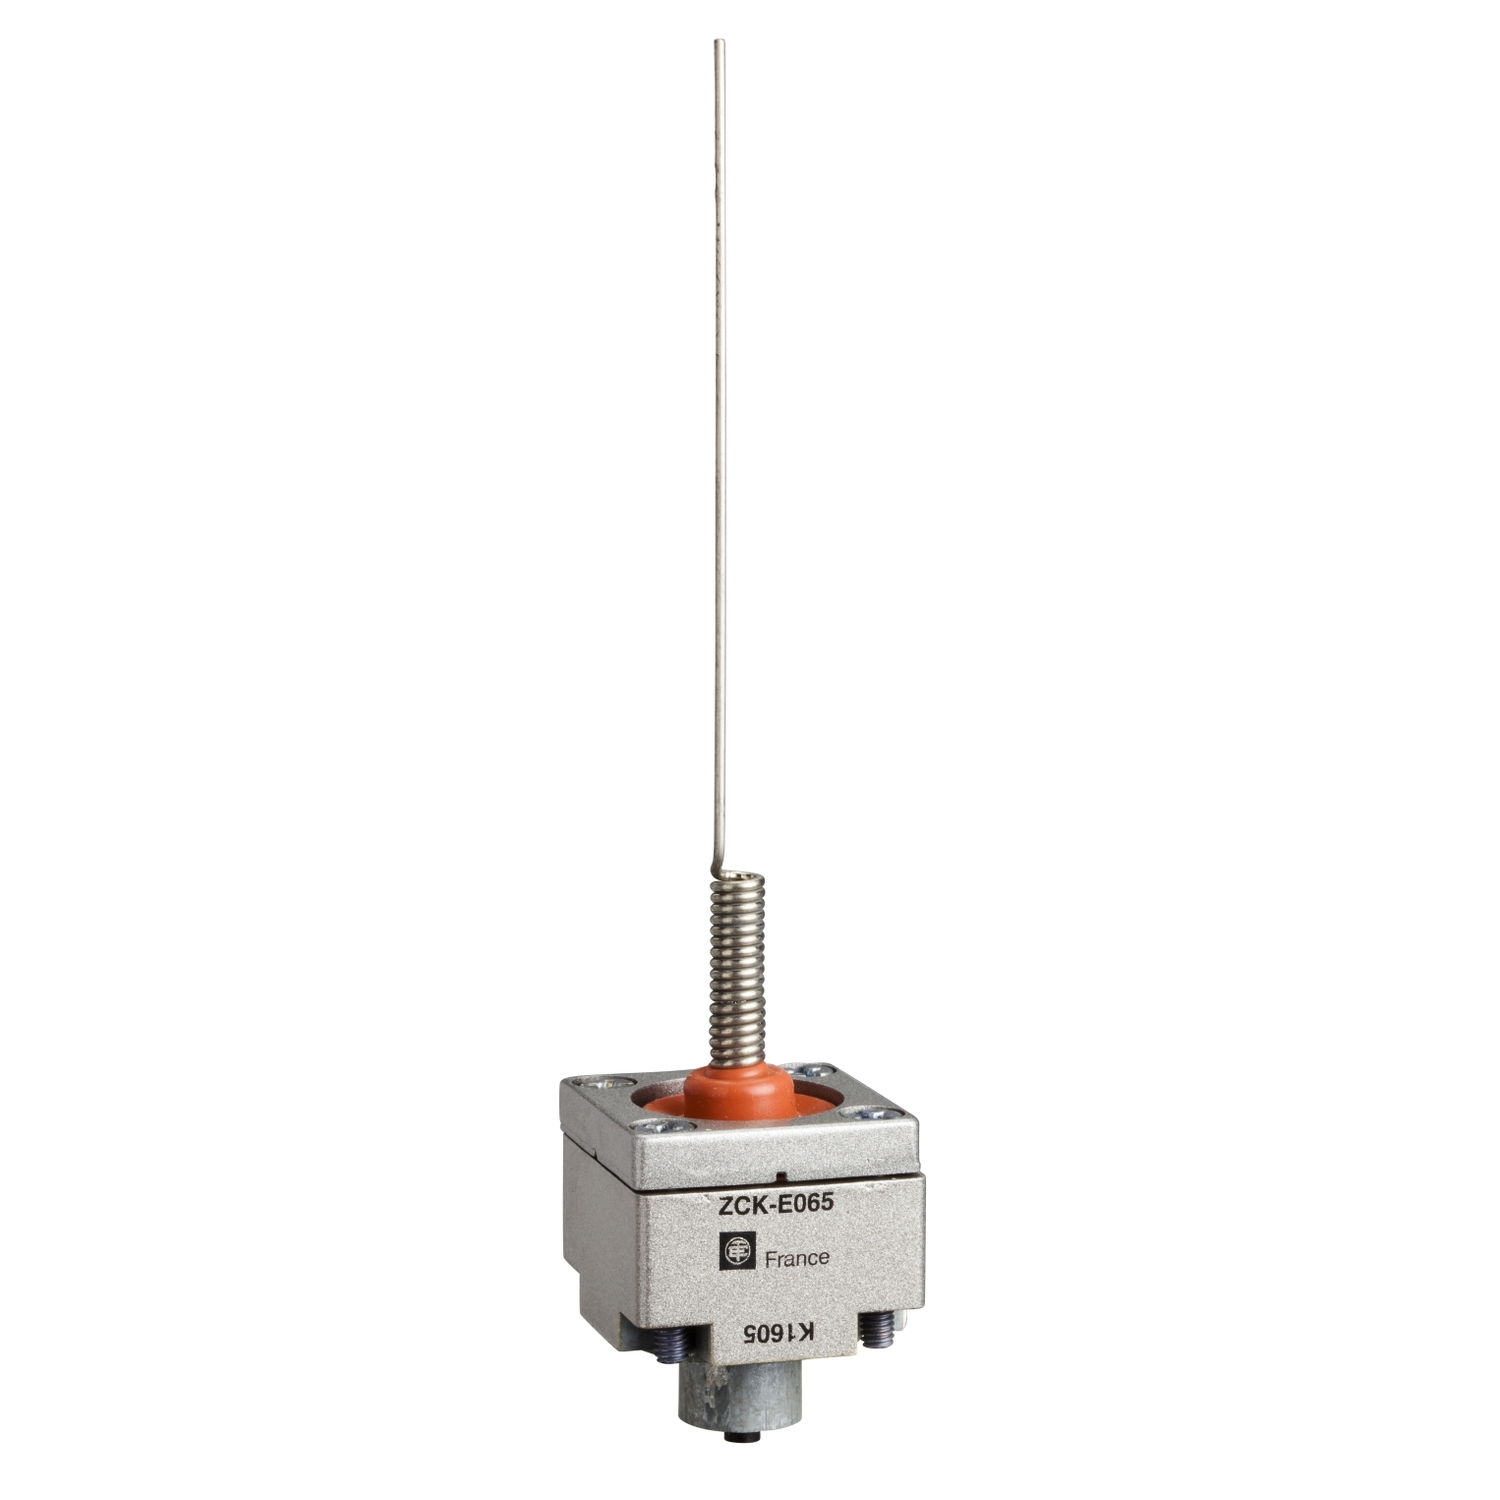 Limit switch head, Limit switches XC Standard, ZCKE, cat's whisker